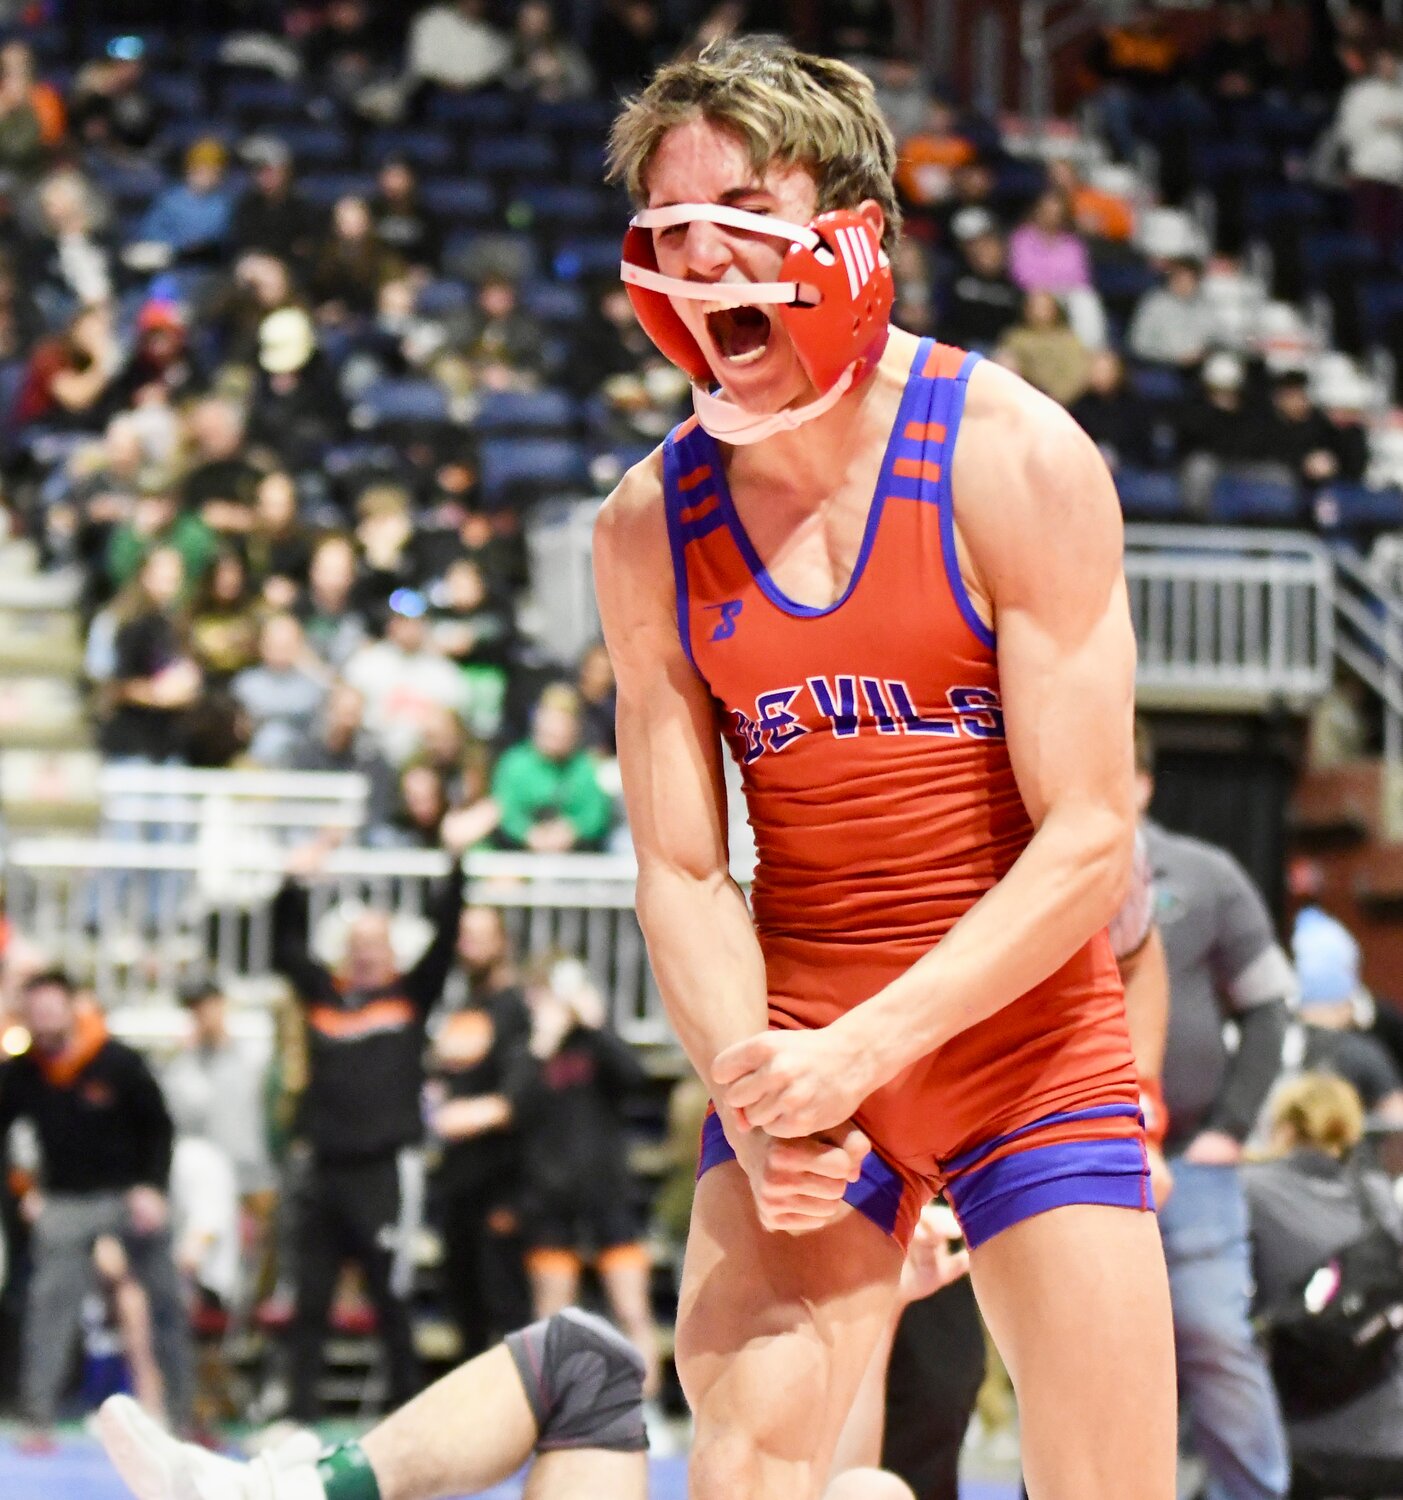 Red Devil senior Ryder Wilson celebrates after securing a spot on the podium at 132 pounds Friday at the 3A State Wrestling Championships in Casper. Wilson finished fifth overall.